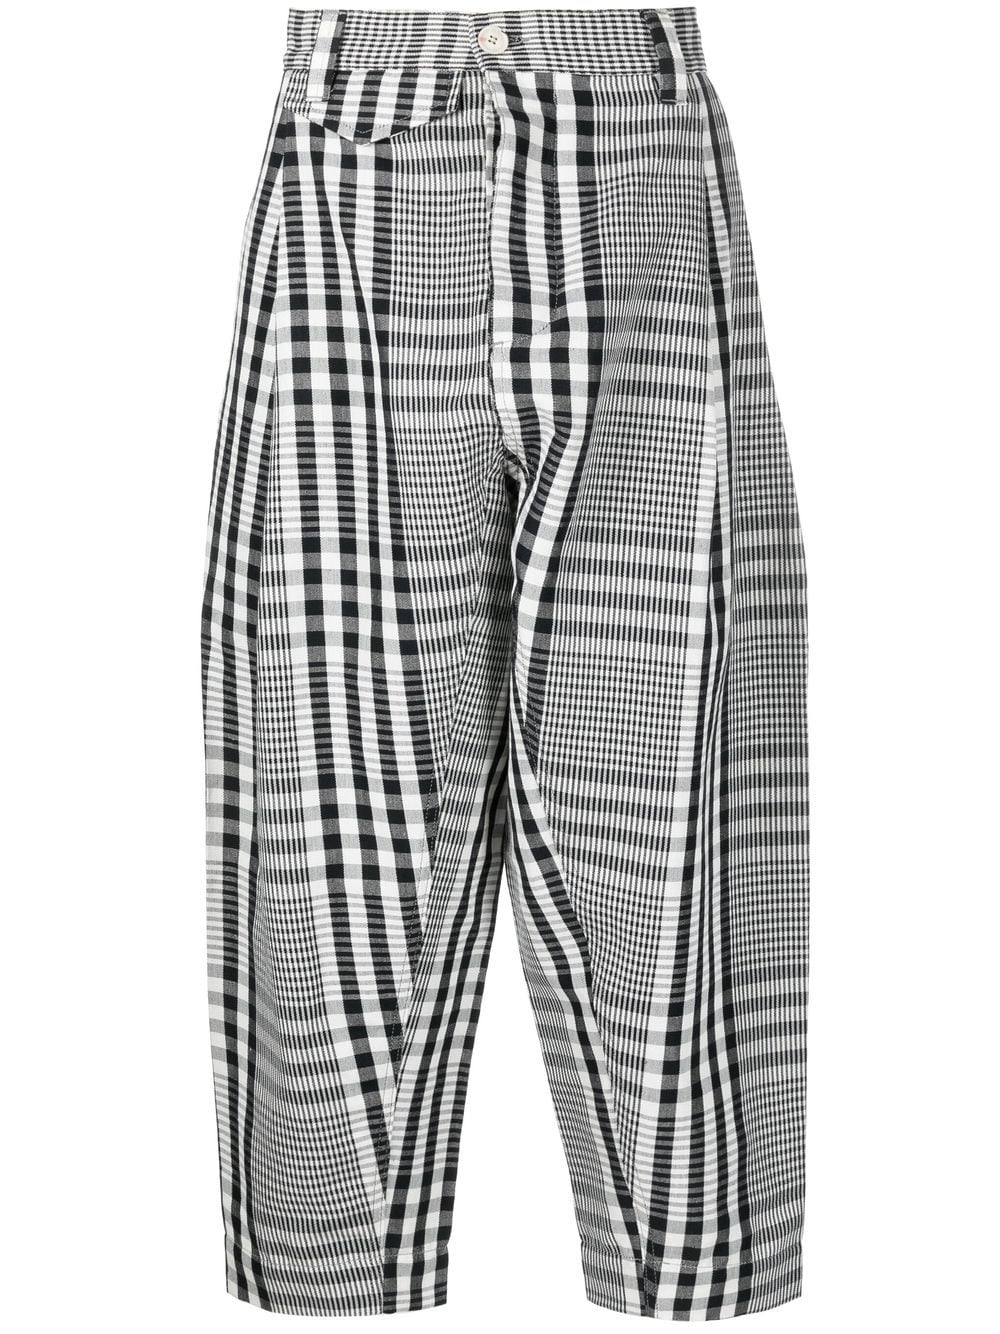 Vivienne Westwood check-pattern Cropped Trousers - Farfetch